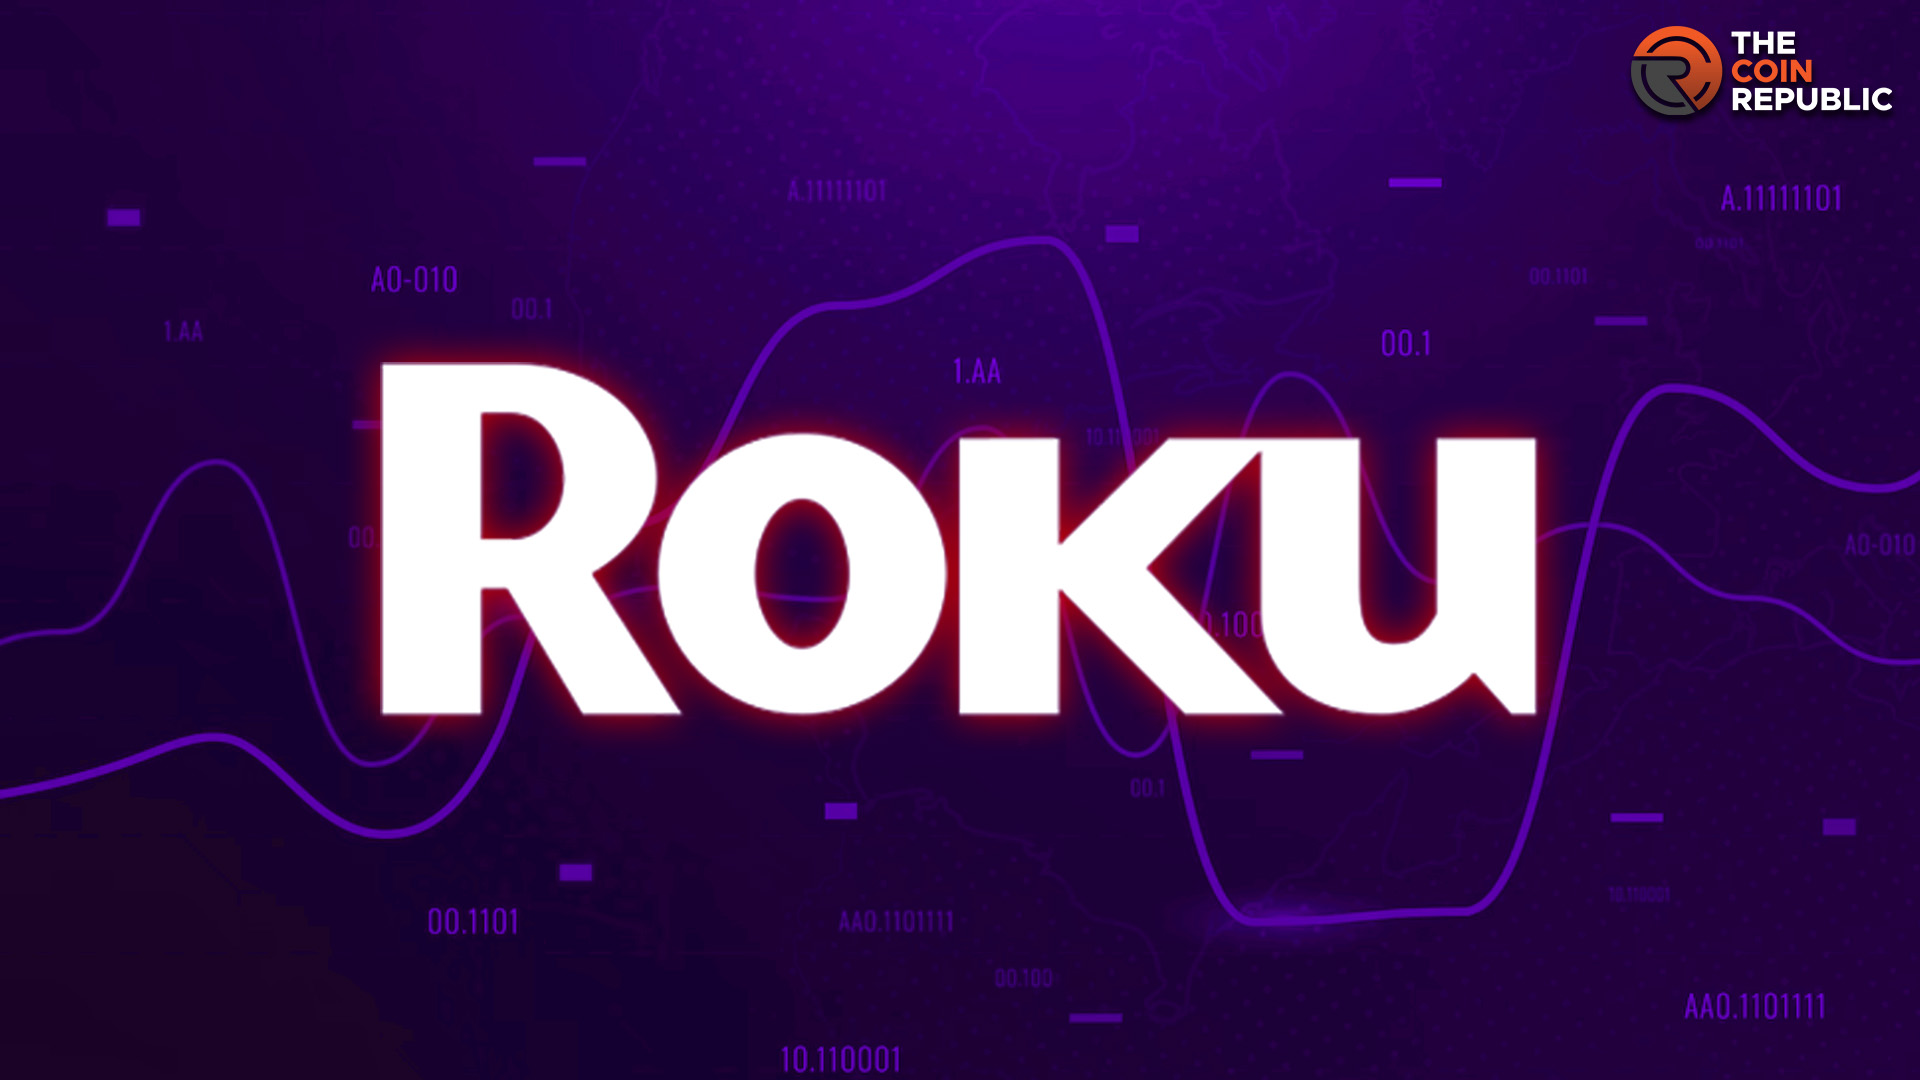 Roku Stock Price Prediction: Is ROKU A Good Choice For Investors?